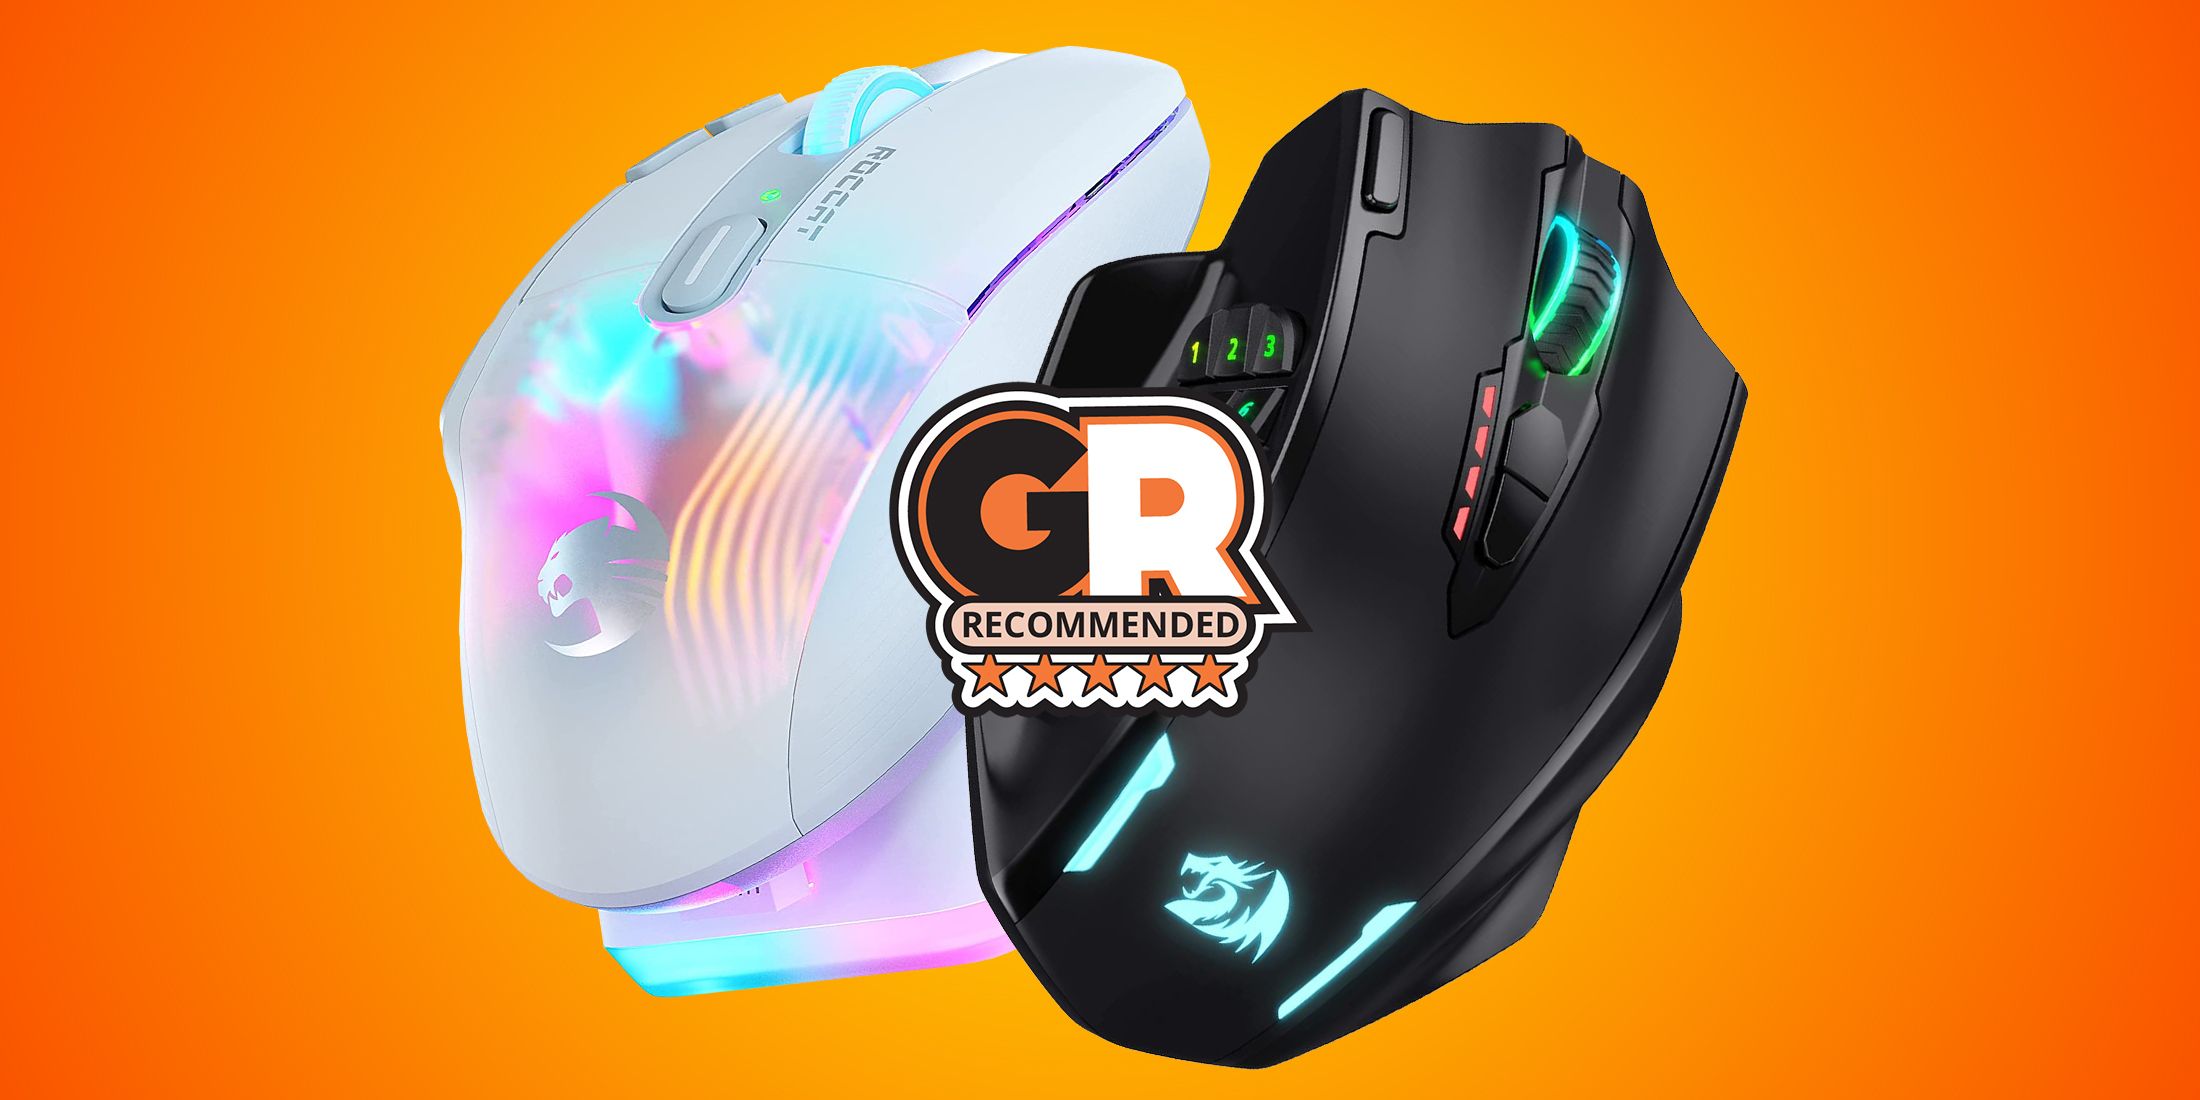 Roccat vs Redragon: Which is the Better Budget Gaming Brand?